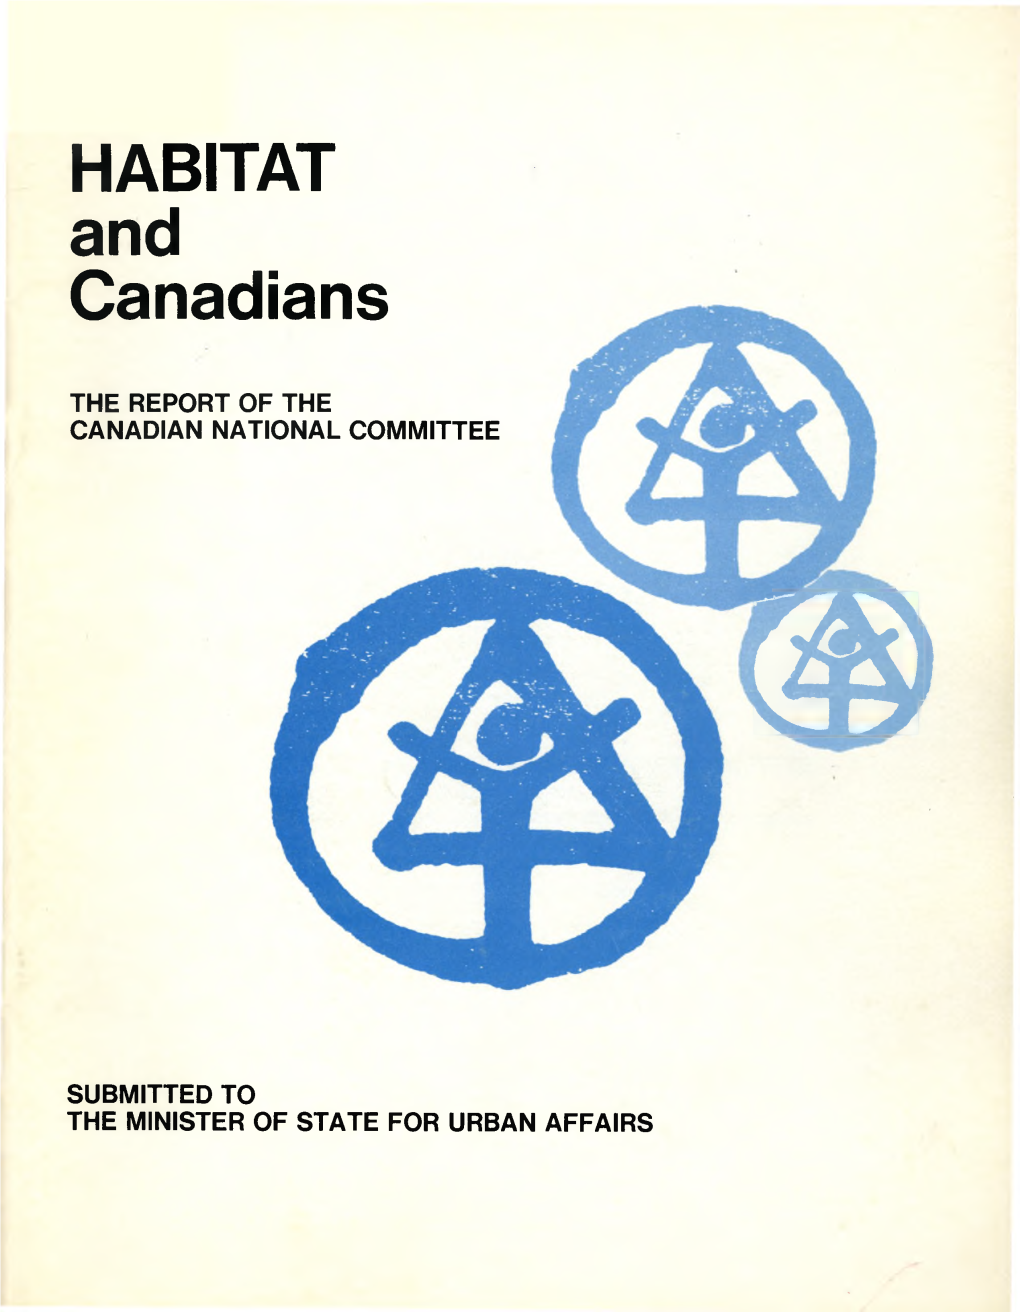 Habitat and Canadians, the Report of the Canadian National Committee